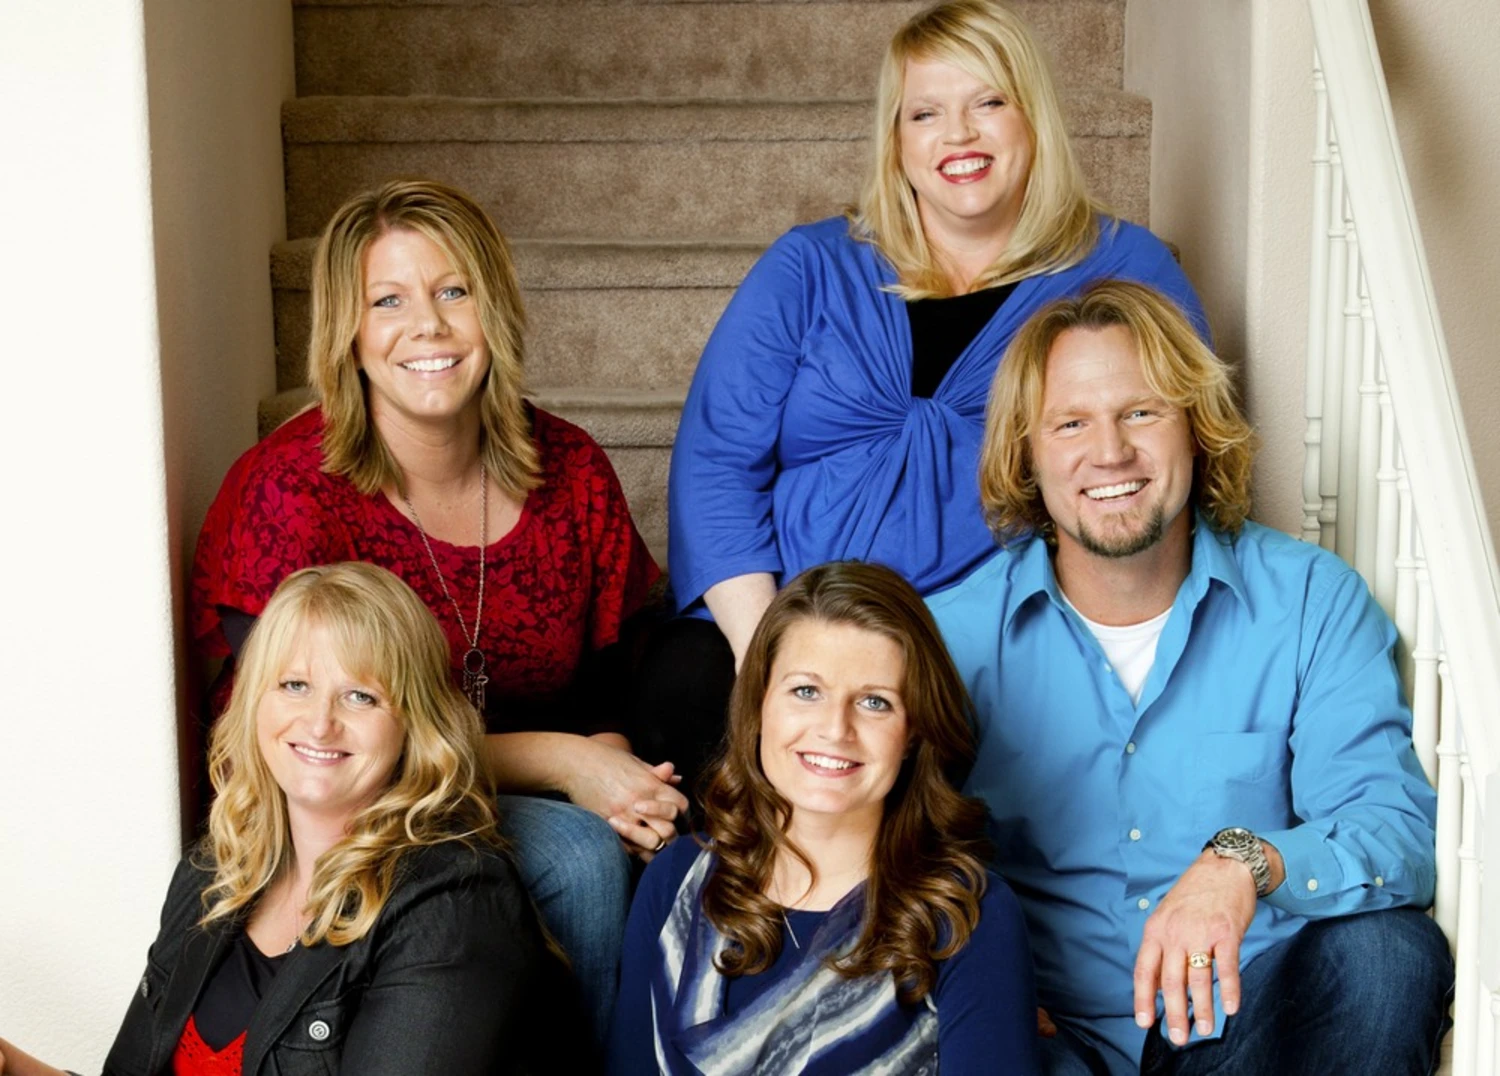 How Will ‘Sister Wives’ Continue Since Kody Brown Ditched Polygamy?